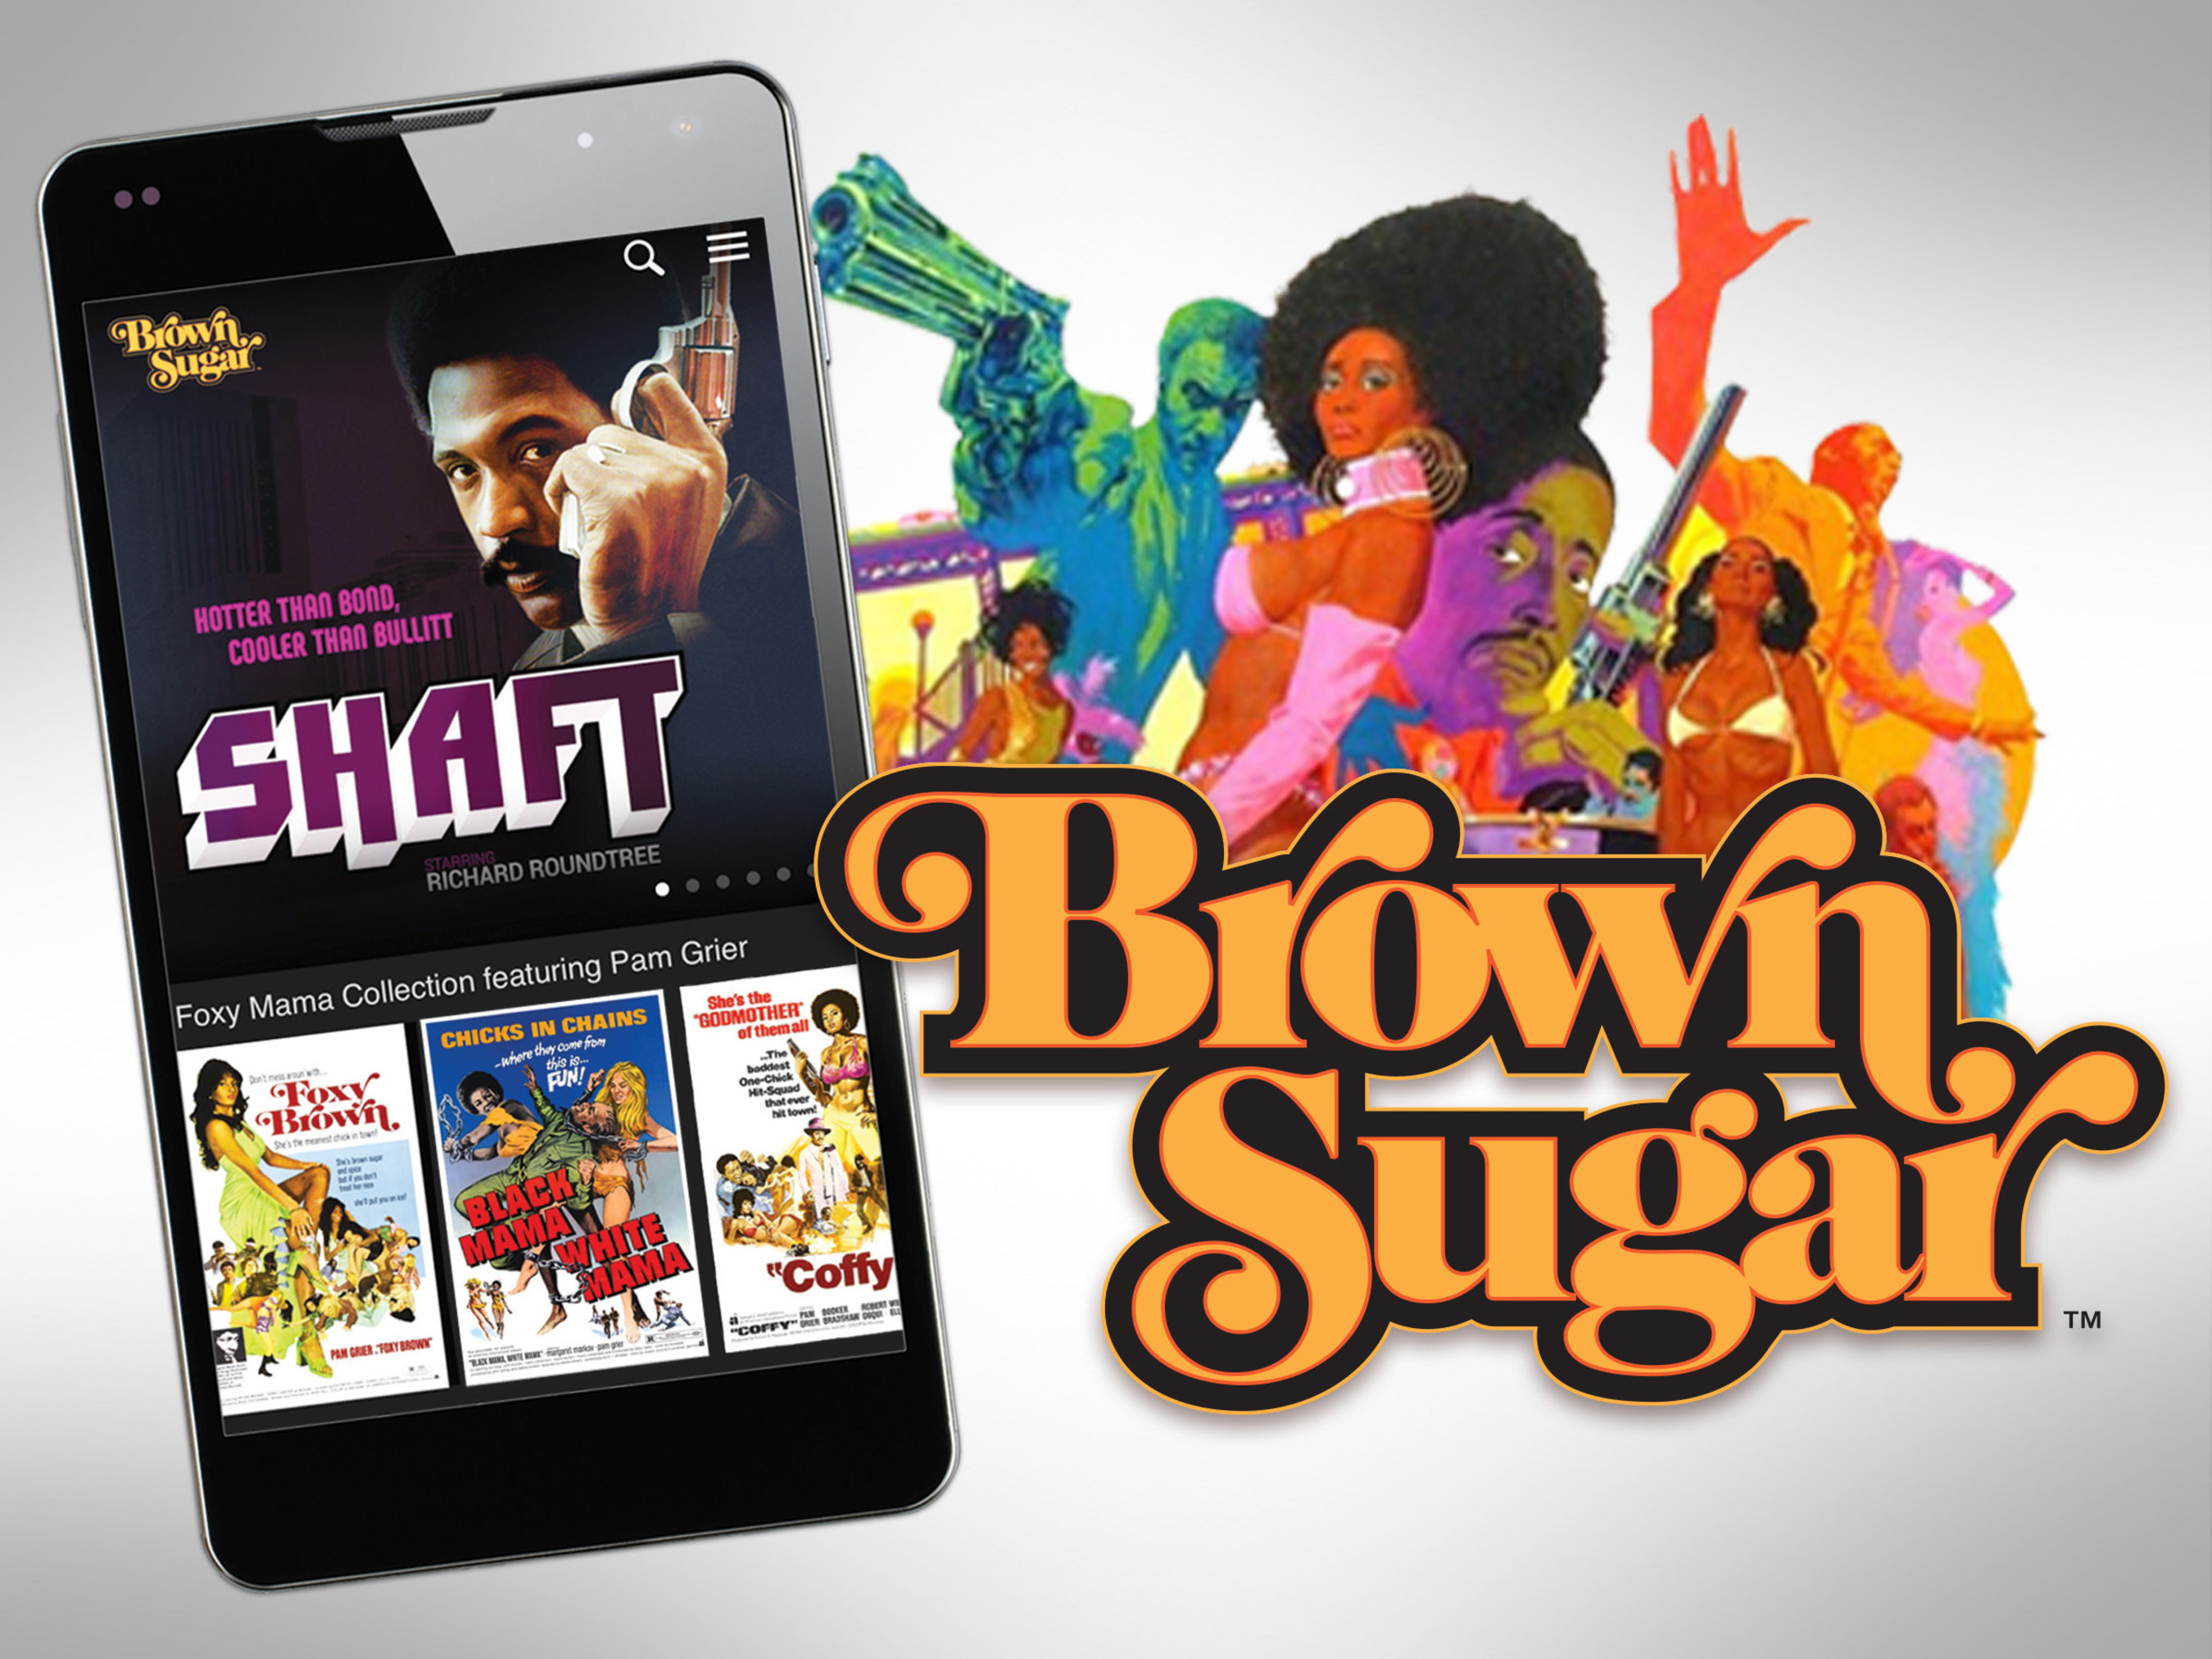 Brown Sugar - New Streaming Service for African Americans Featuring the Biggest Collection of the Baddest Movies